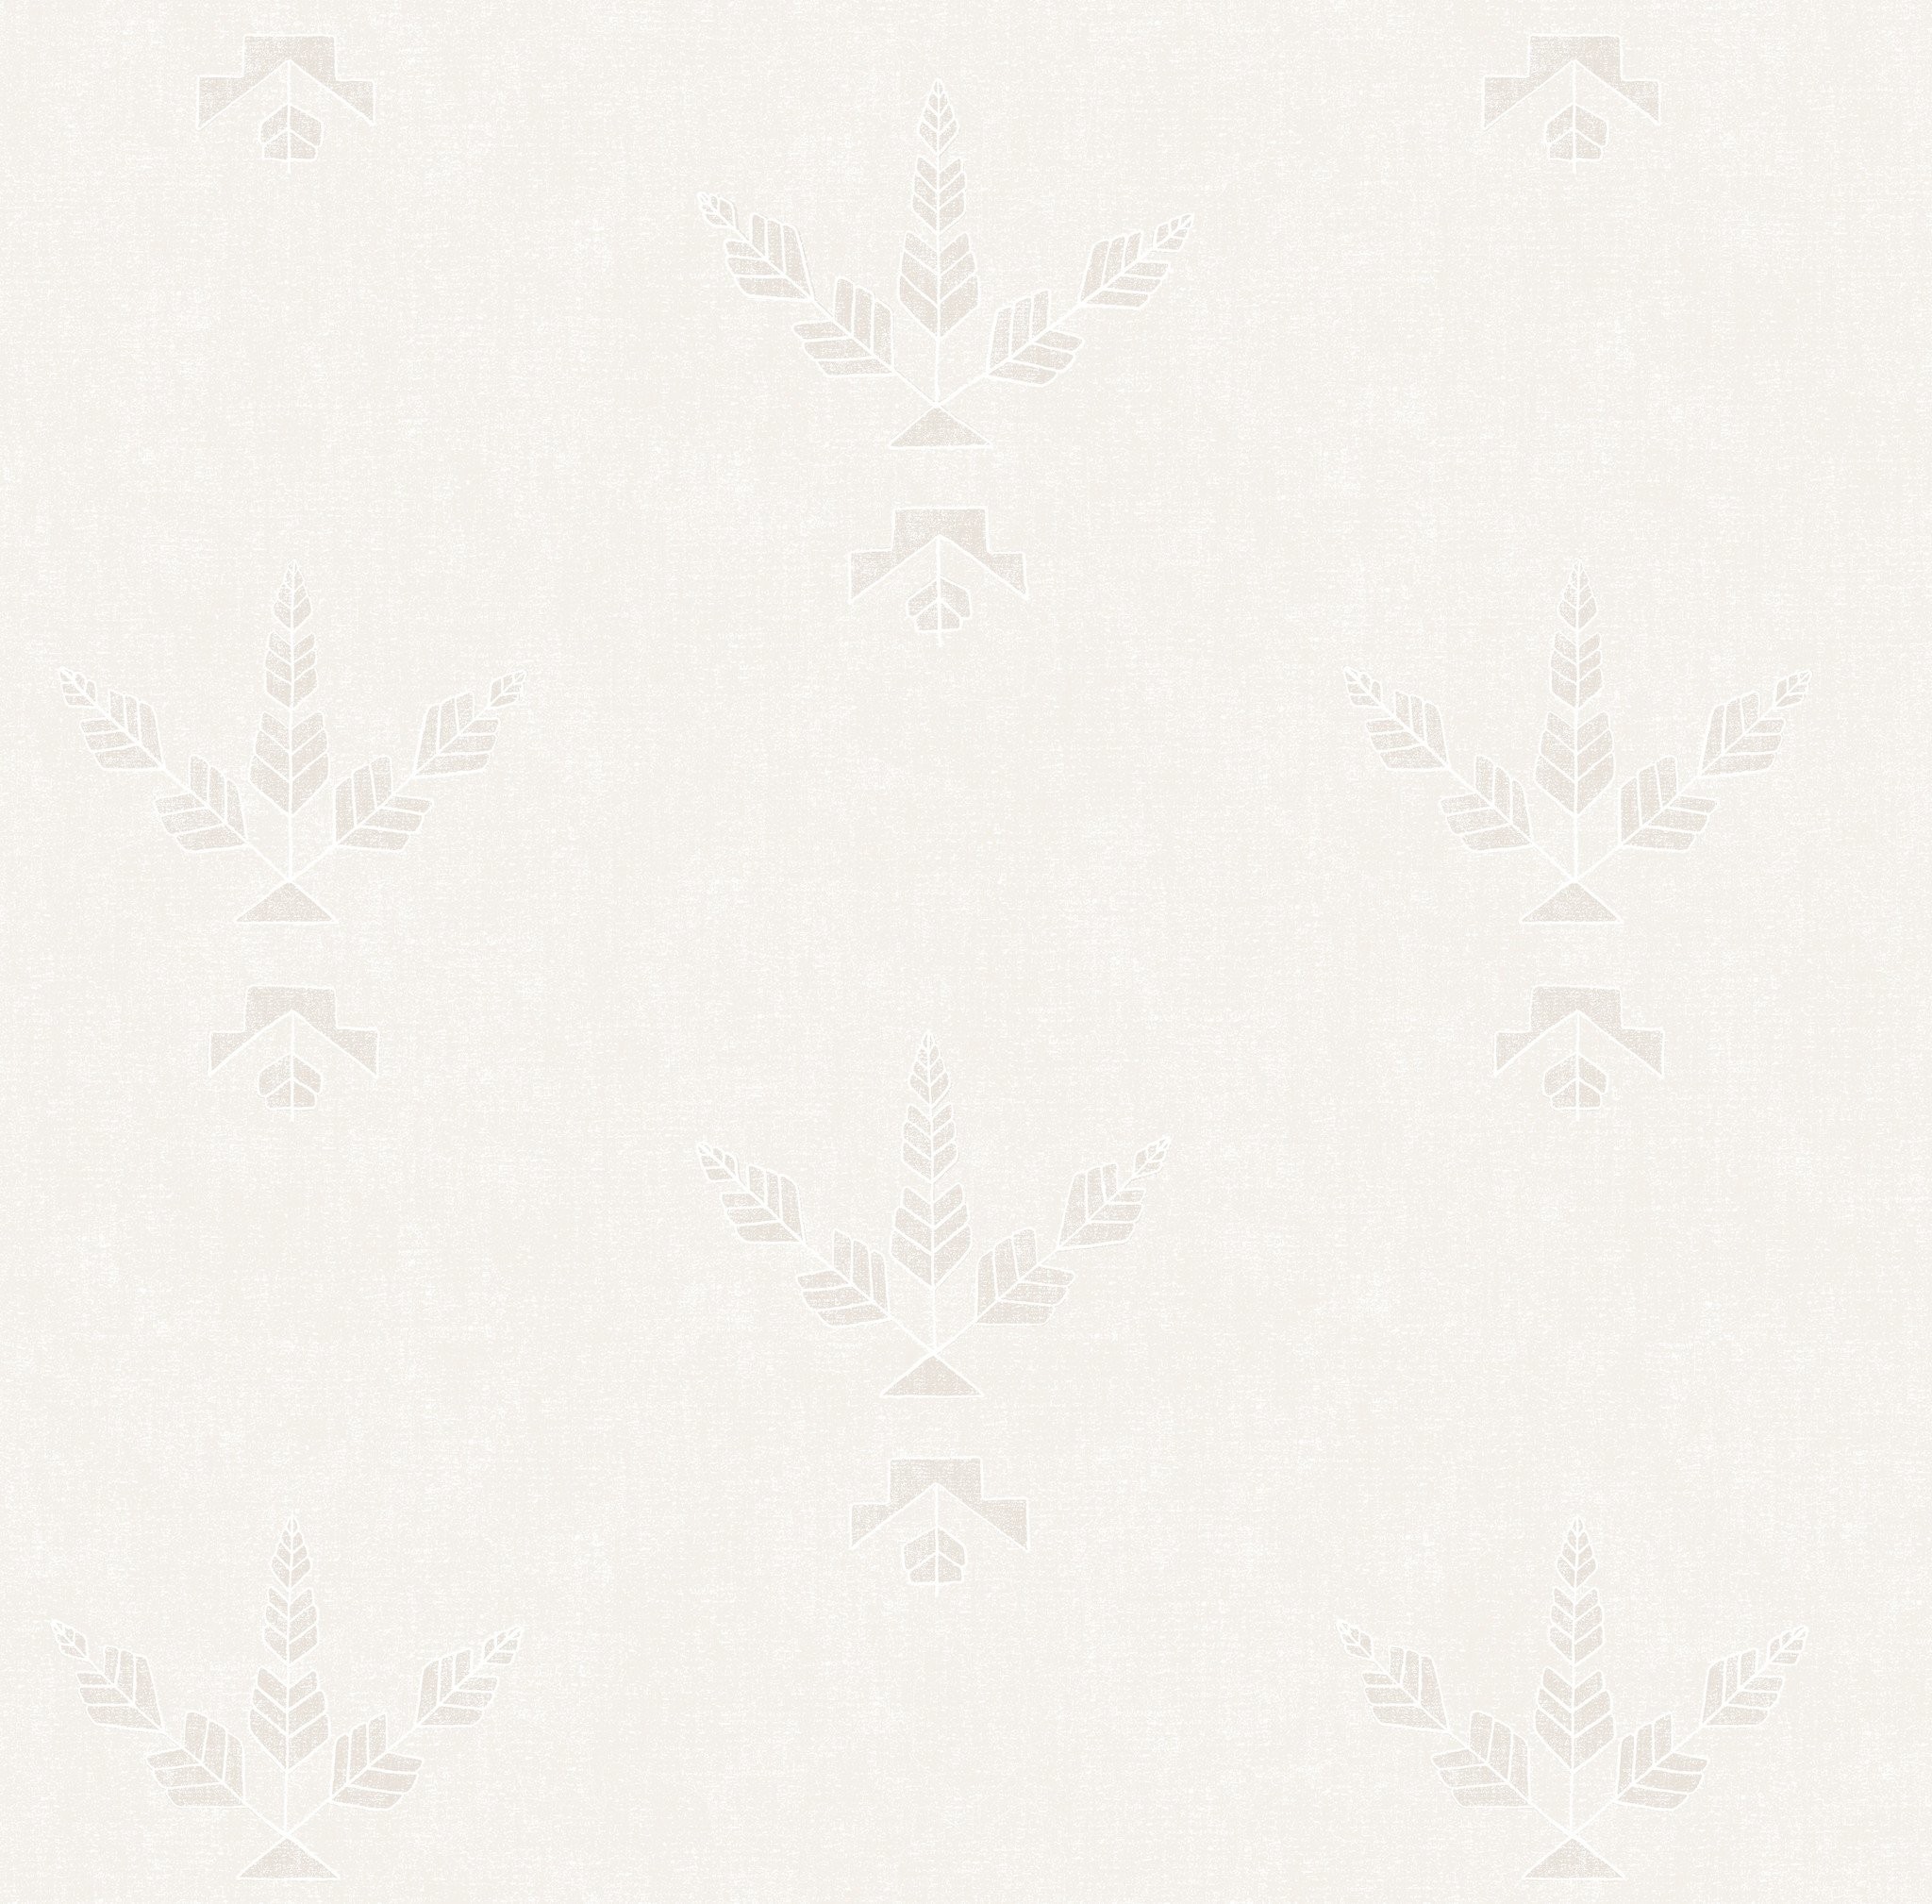 2048x2018 "This chic designer wallpaper is available in Slate (light blue and slate  blue on white), Oat (light beige and tan on white), ...